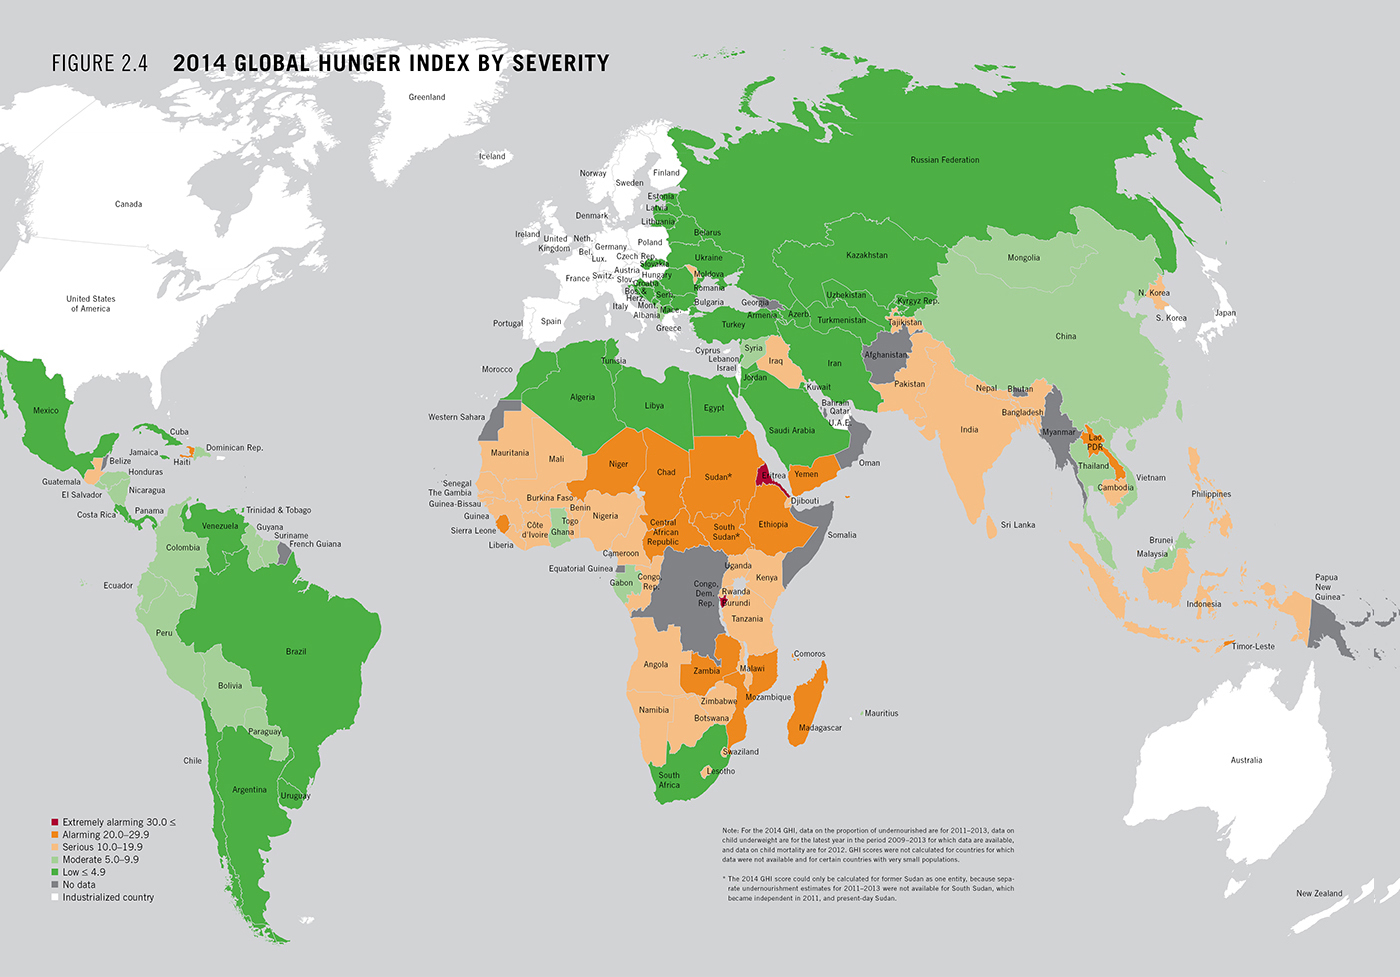 2014 Global Hunger Index by Severity